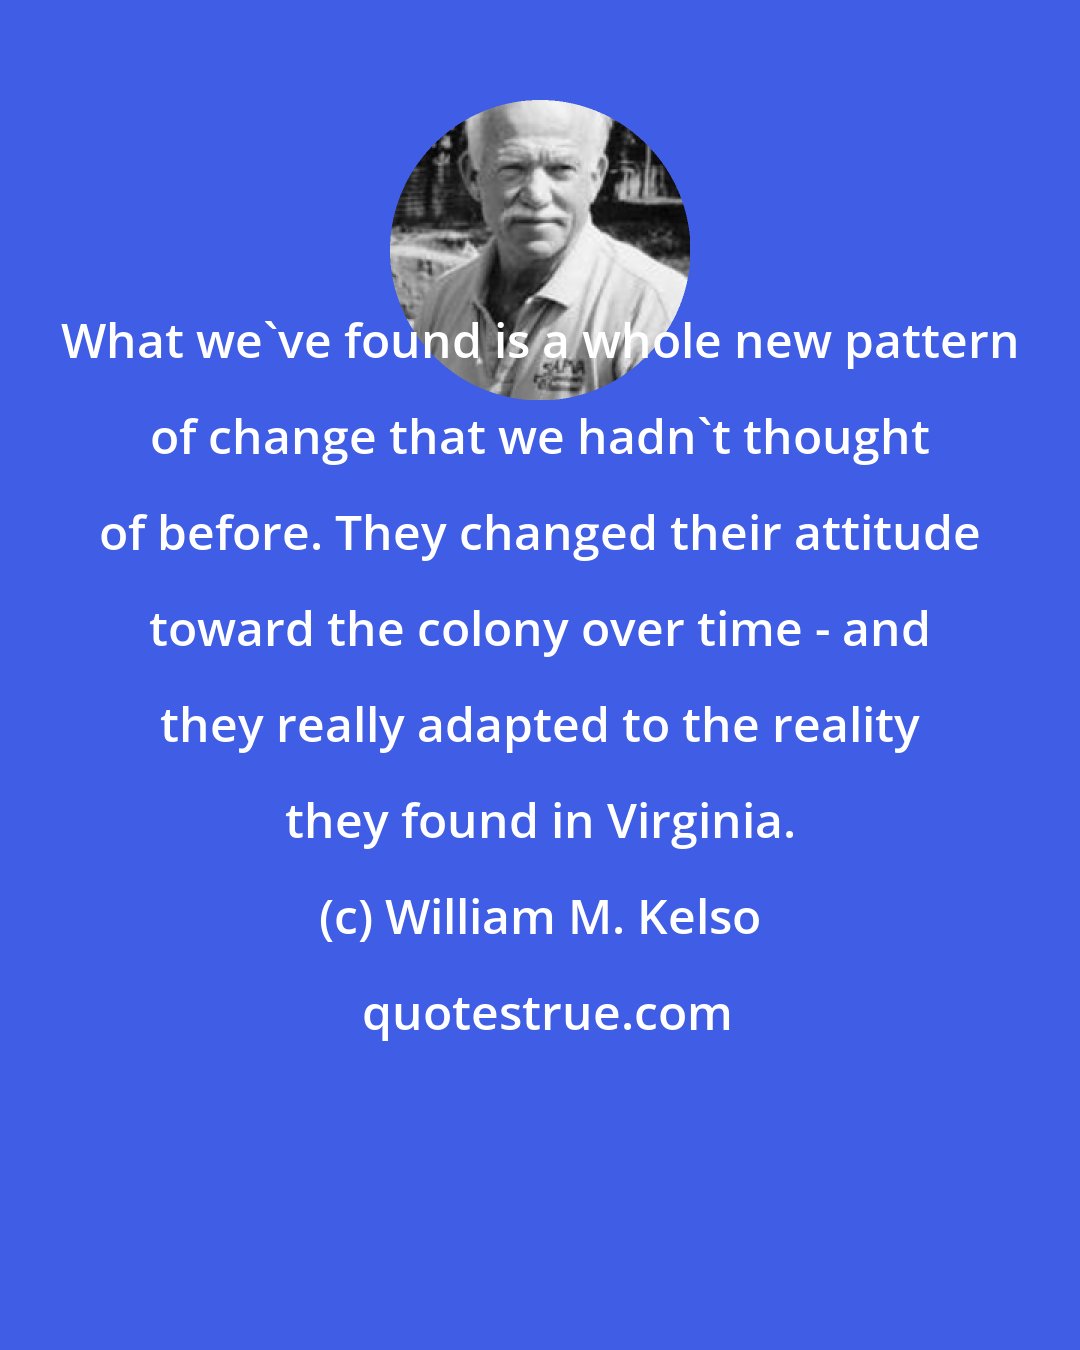 William M. Kelso: What we've found is a whole new pattern of change that we hadn't thought of before. They changed their attitude toward the colony over time - and they really adapted to the reality they found in Virginia.